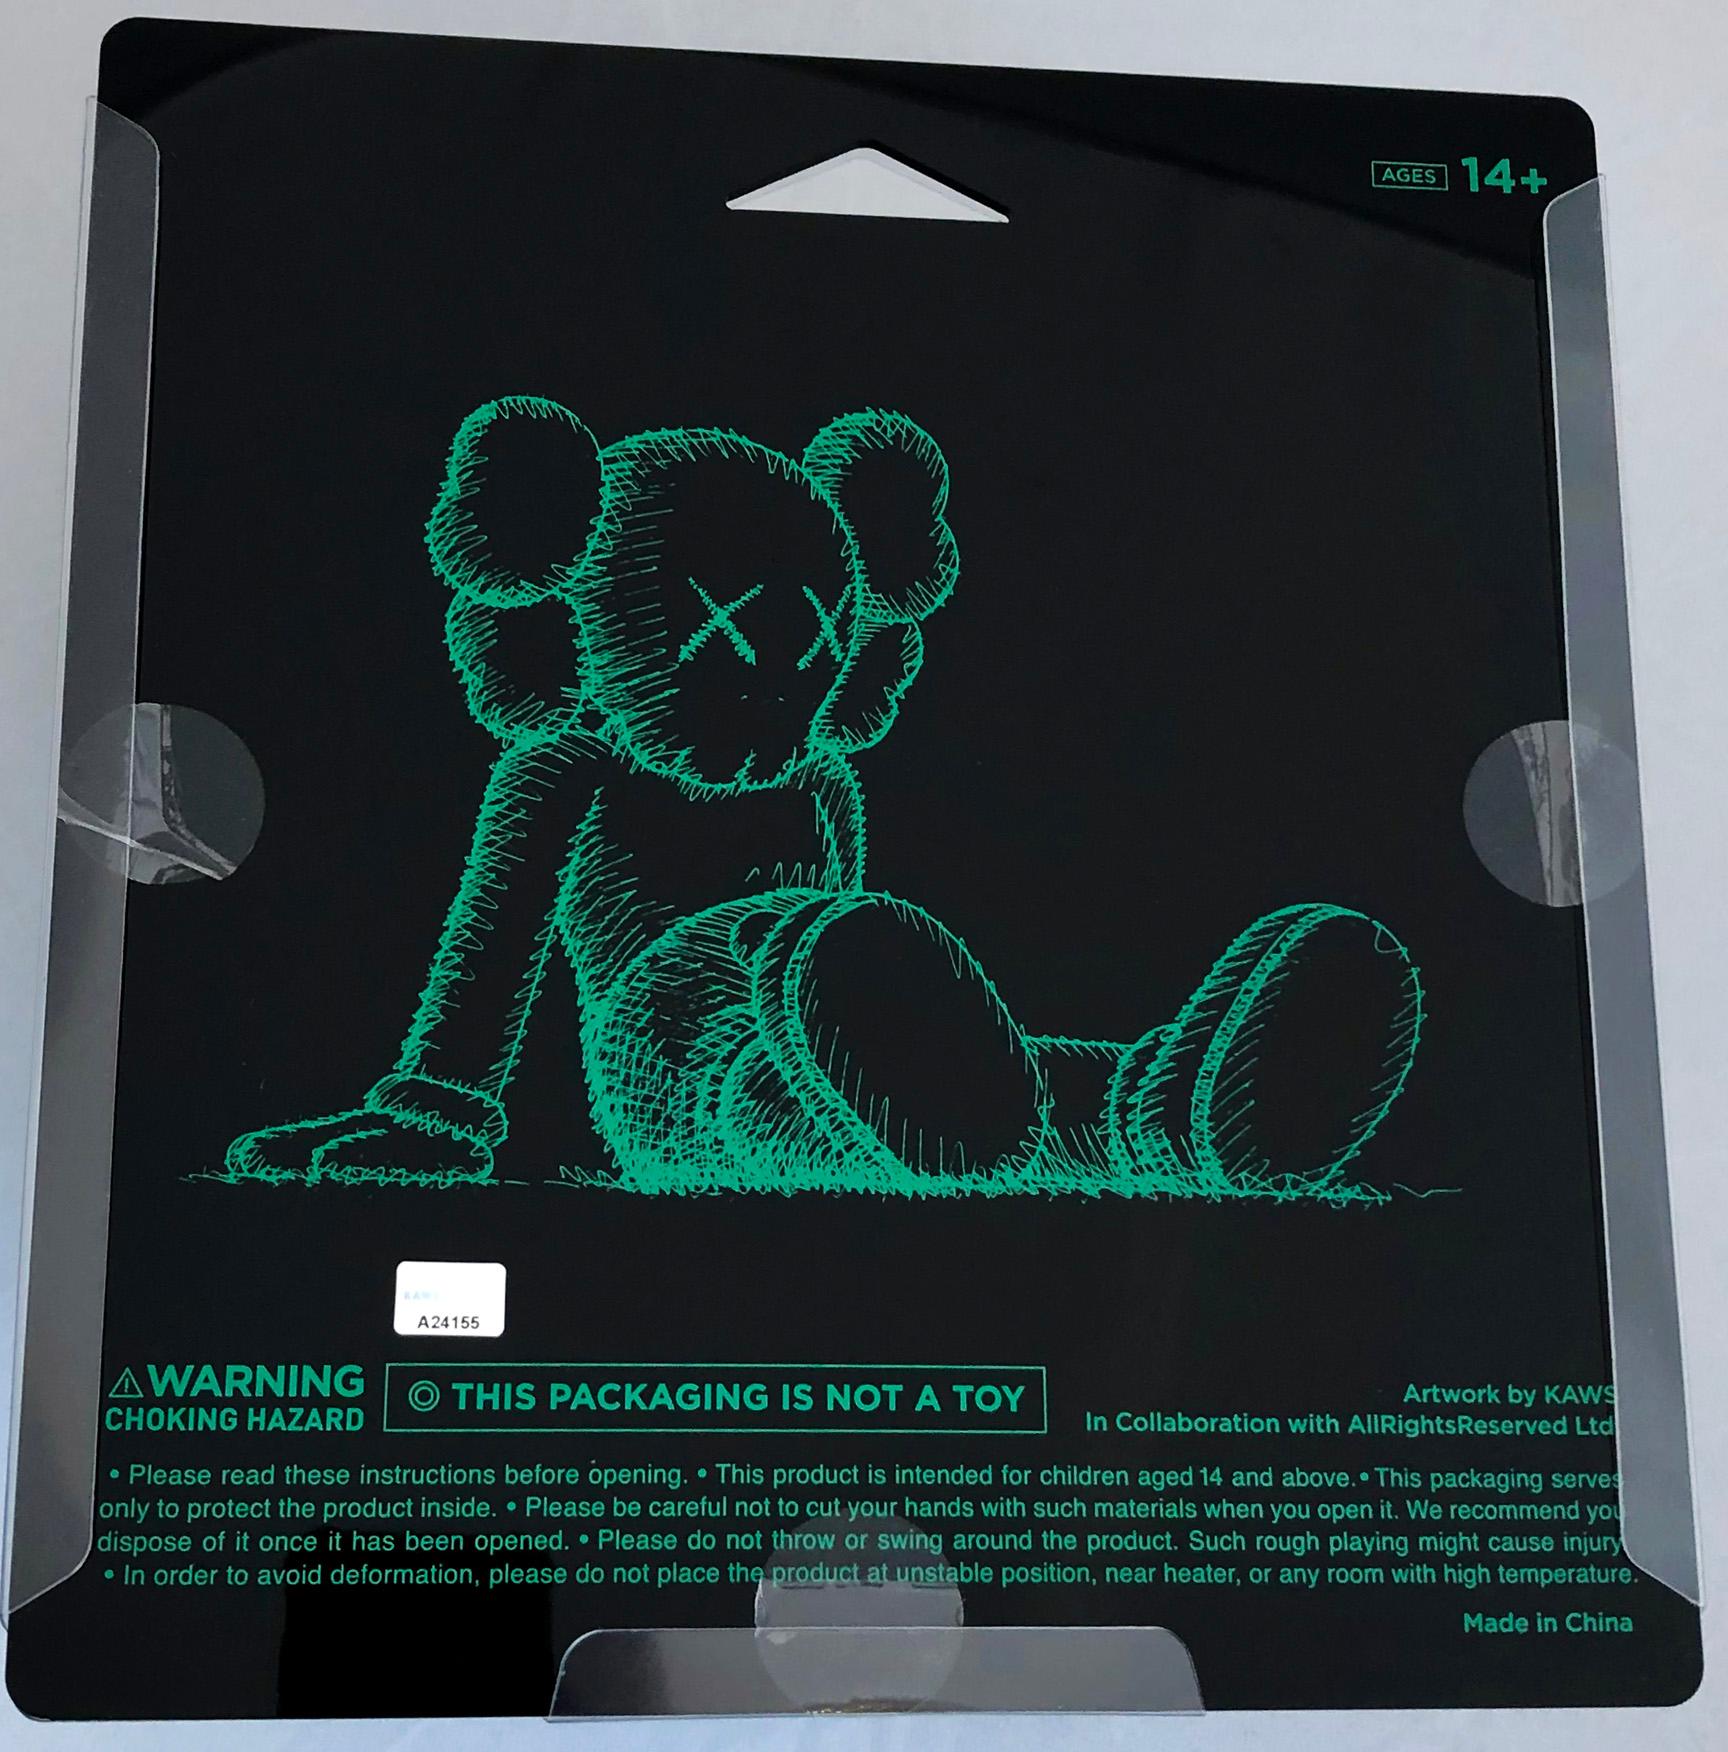 KAWS Holiday Companion, Complete Set of 3 (KAWS Taipei): 
KAWS' signature character COMPANION presented in a resting seated position. 3 individual pieces (black, brown, & grey). Each published by All Rights Reserved to commemorate the debut of KAWS’